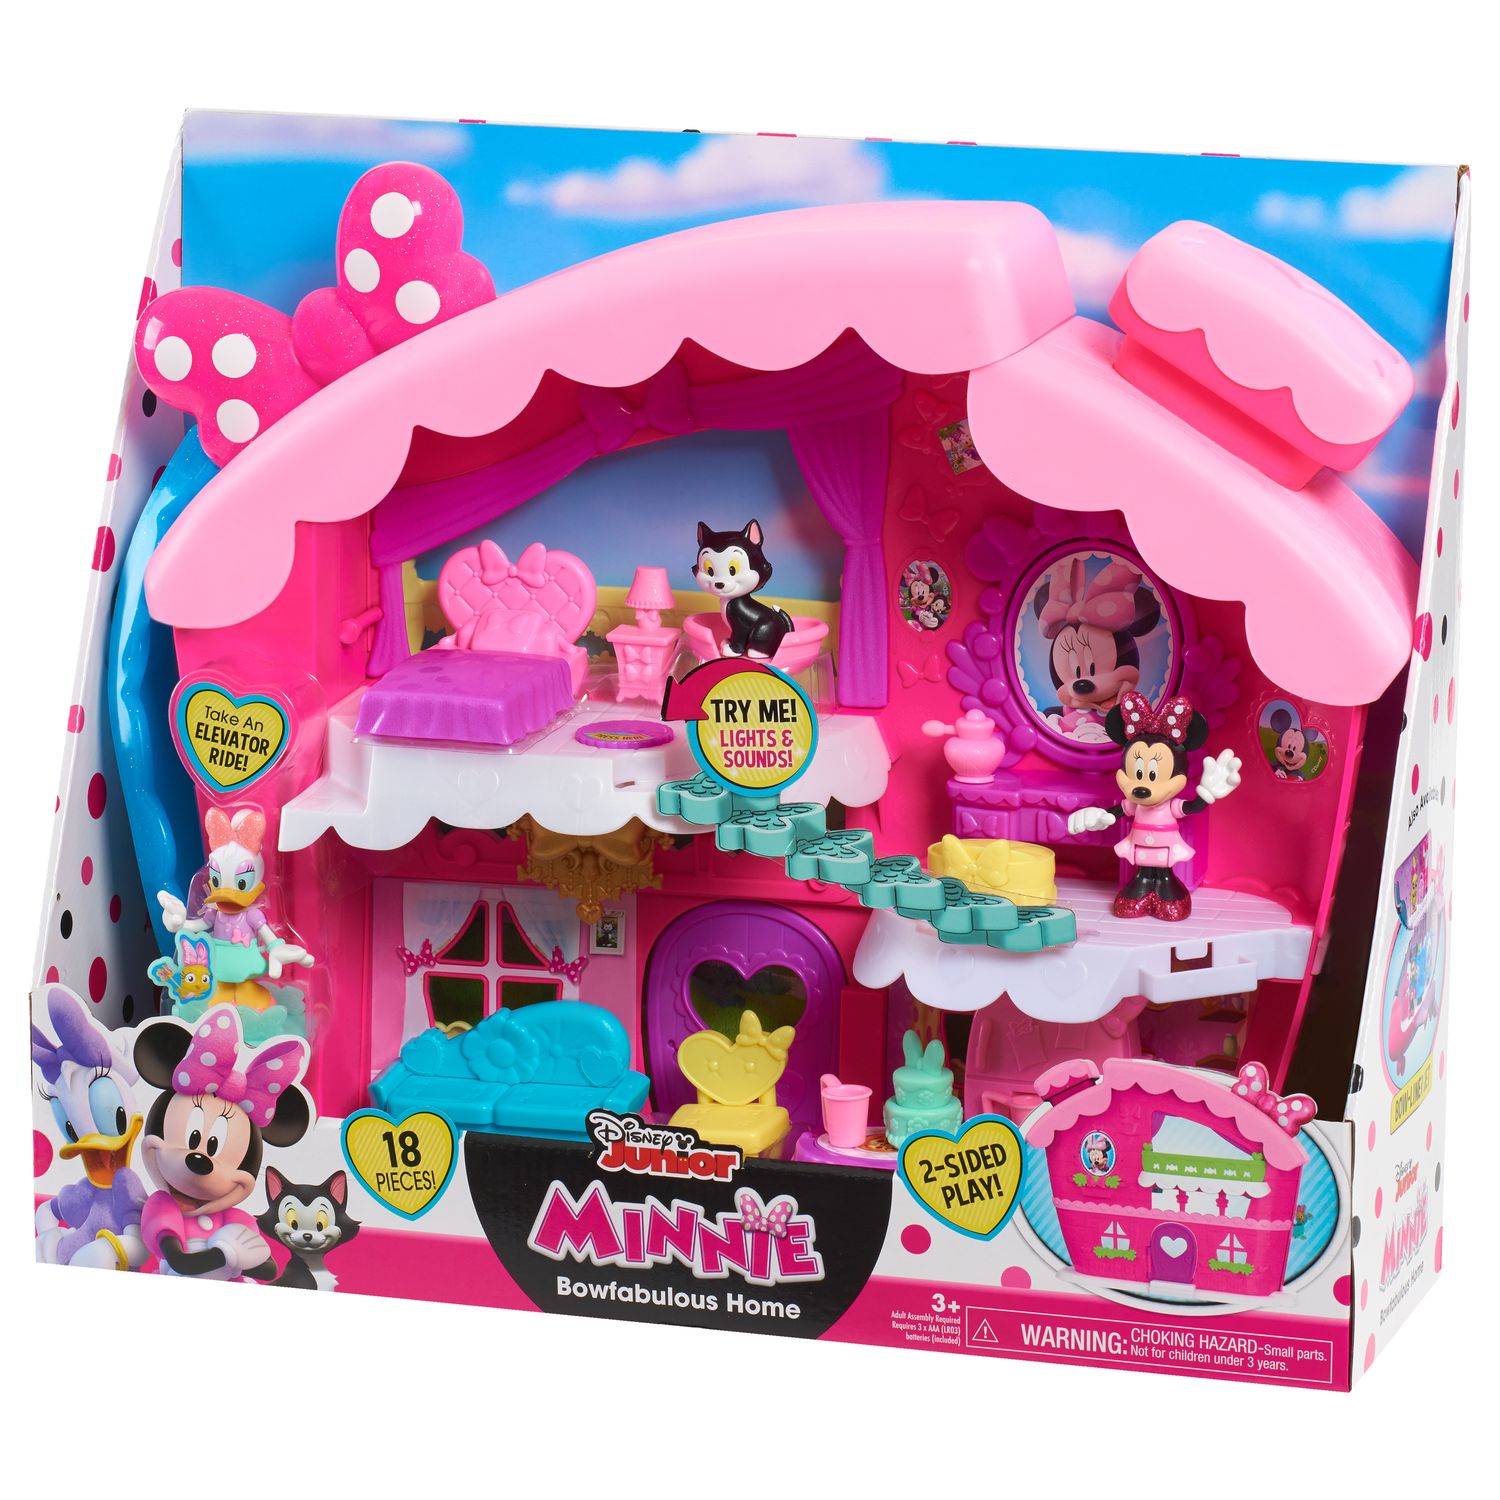 minnie pastry oven playset